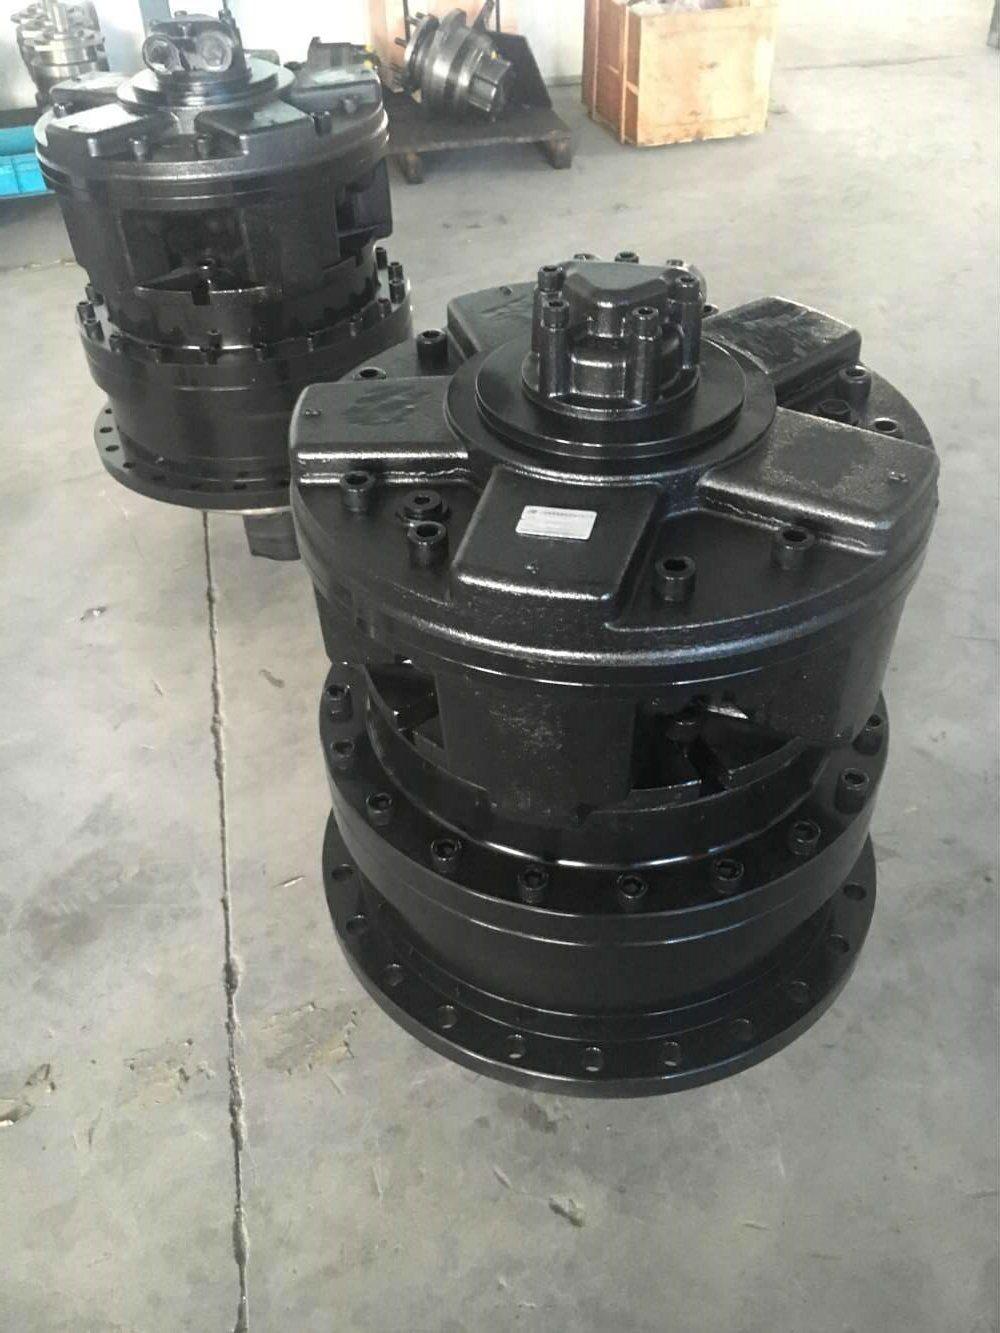 Italy Sai GM2-2700 Radial Piston Low Speed High Torque Rpm Inner Five Star Hydraulic Motor for Winch, Anchor, Saw Crane